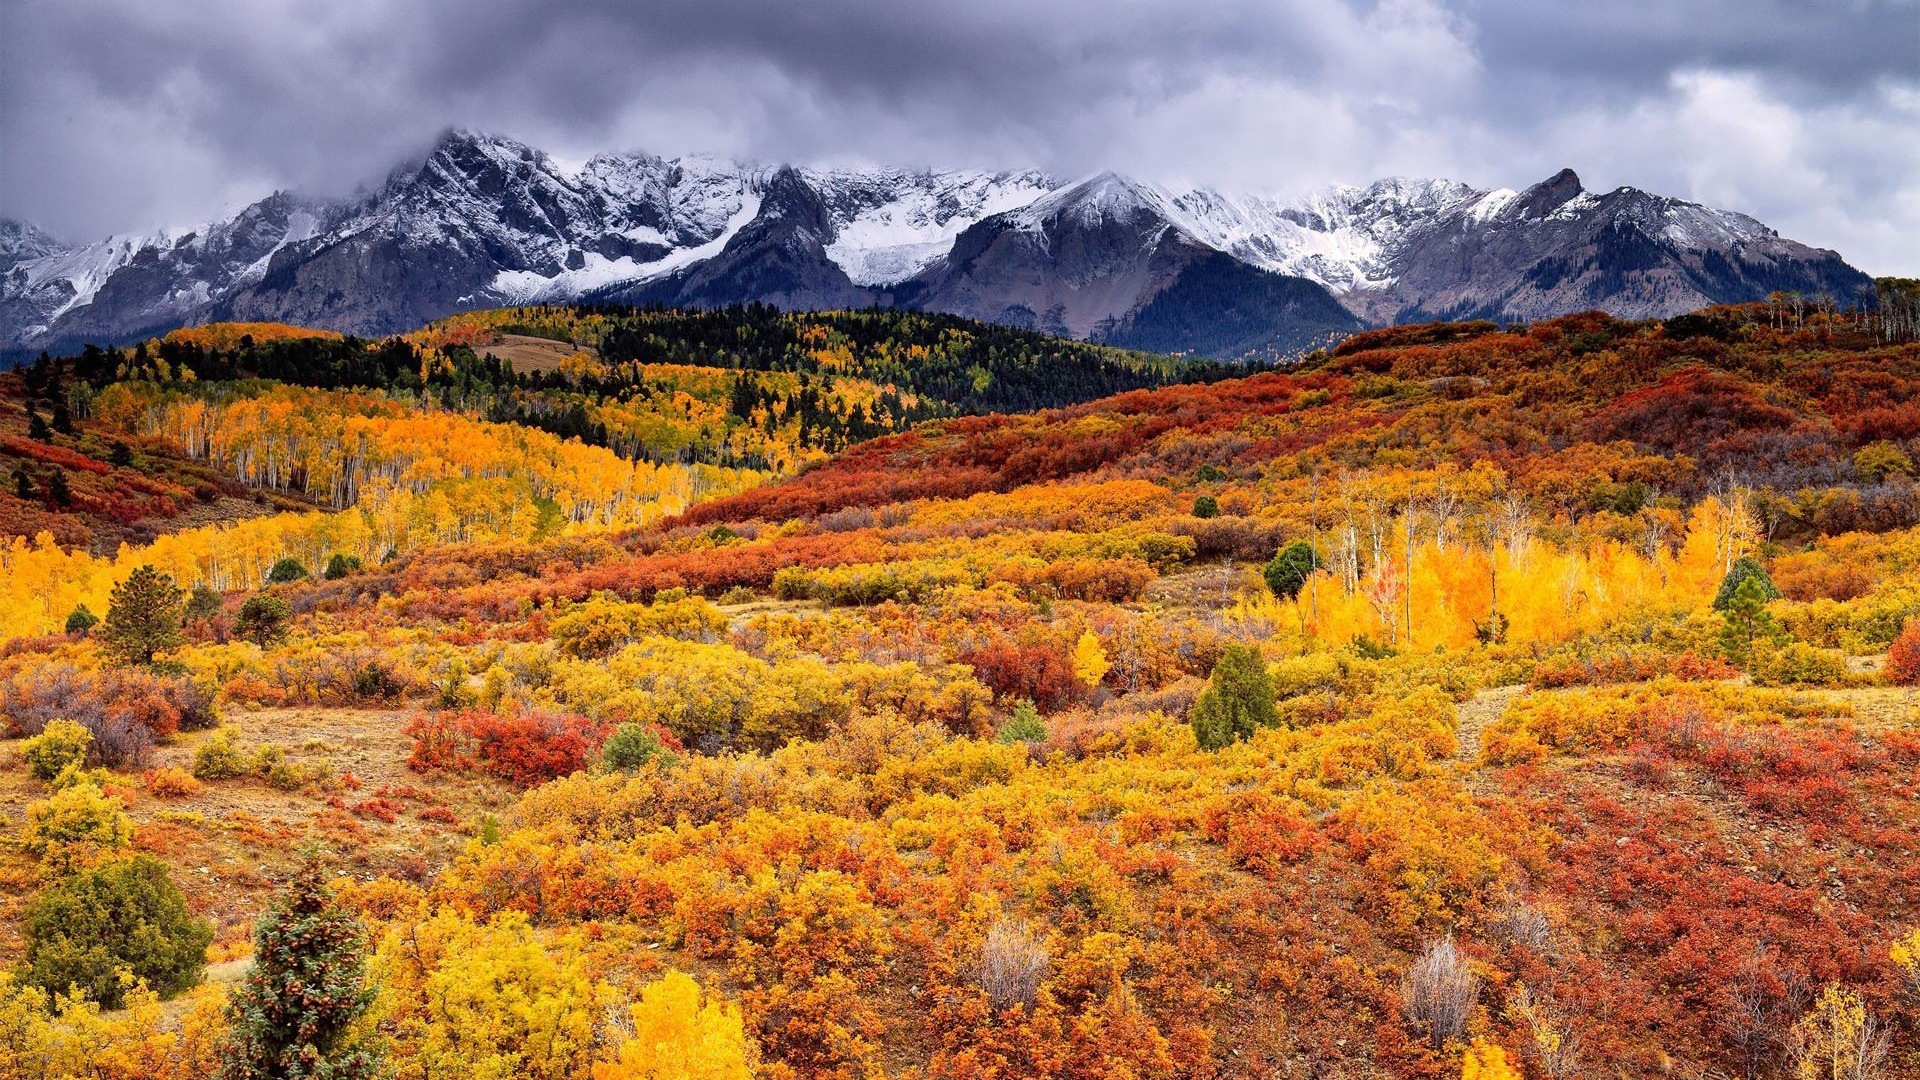 1 Theme Hd Wallpapers - Snowy Mountains In Autumn - HD Wallpaper 